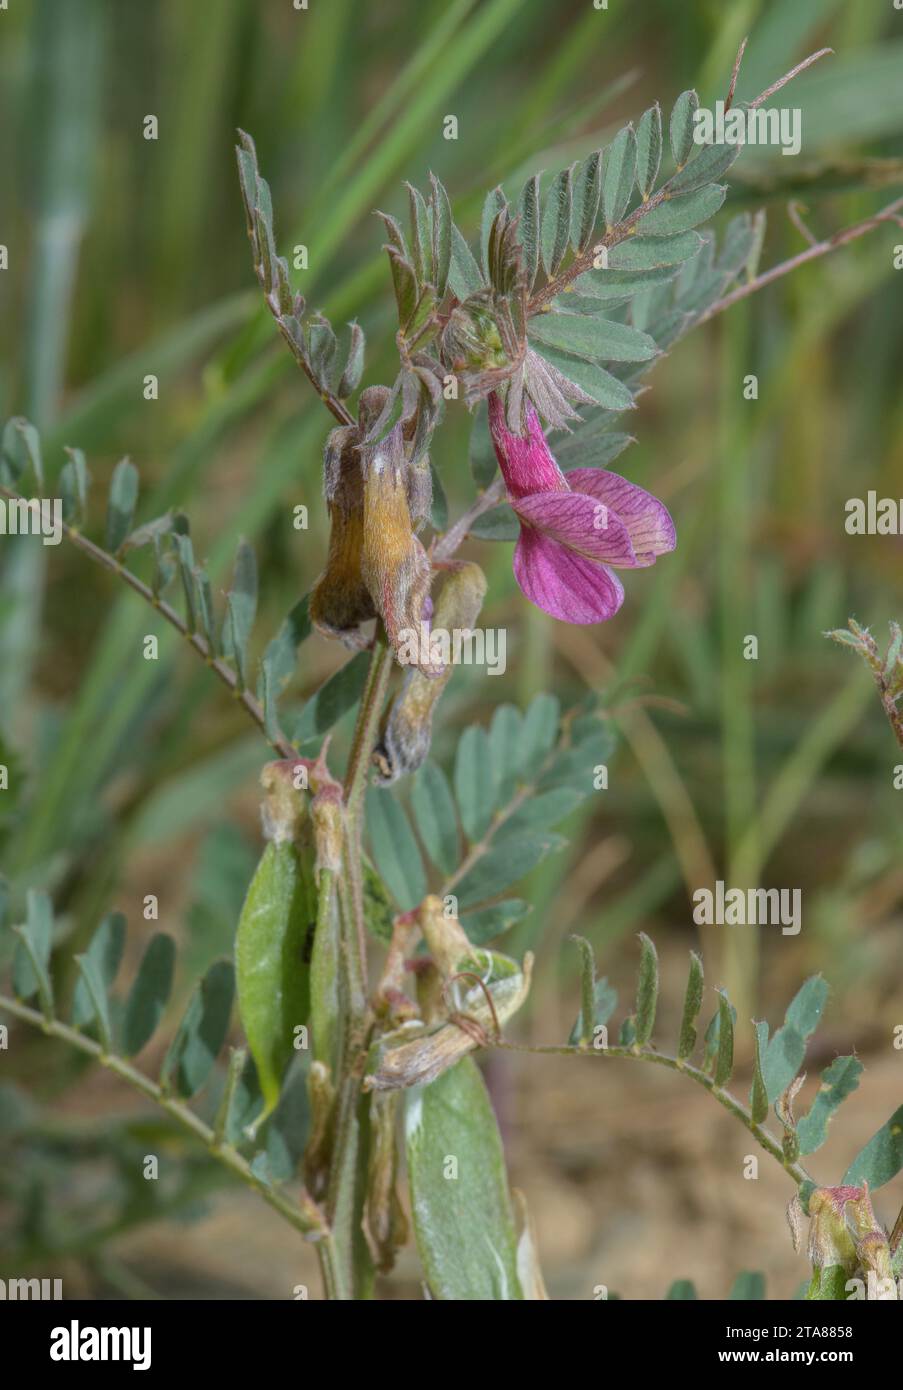 Purple form of Hungarian vetch, Vicia pannonica var. purpurascens growing as cornfield weed, Pyrenees. Stock Photo